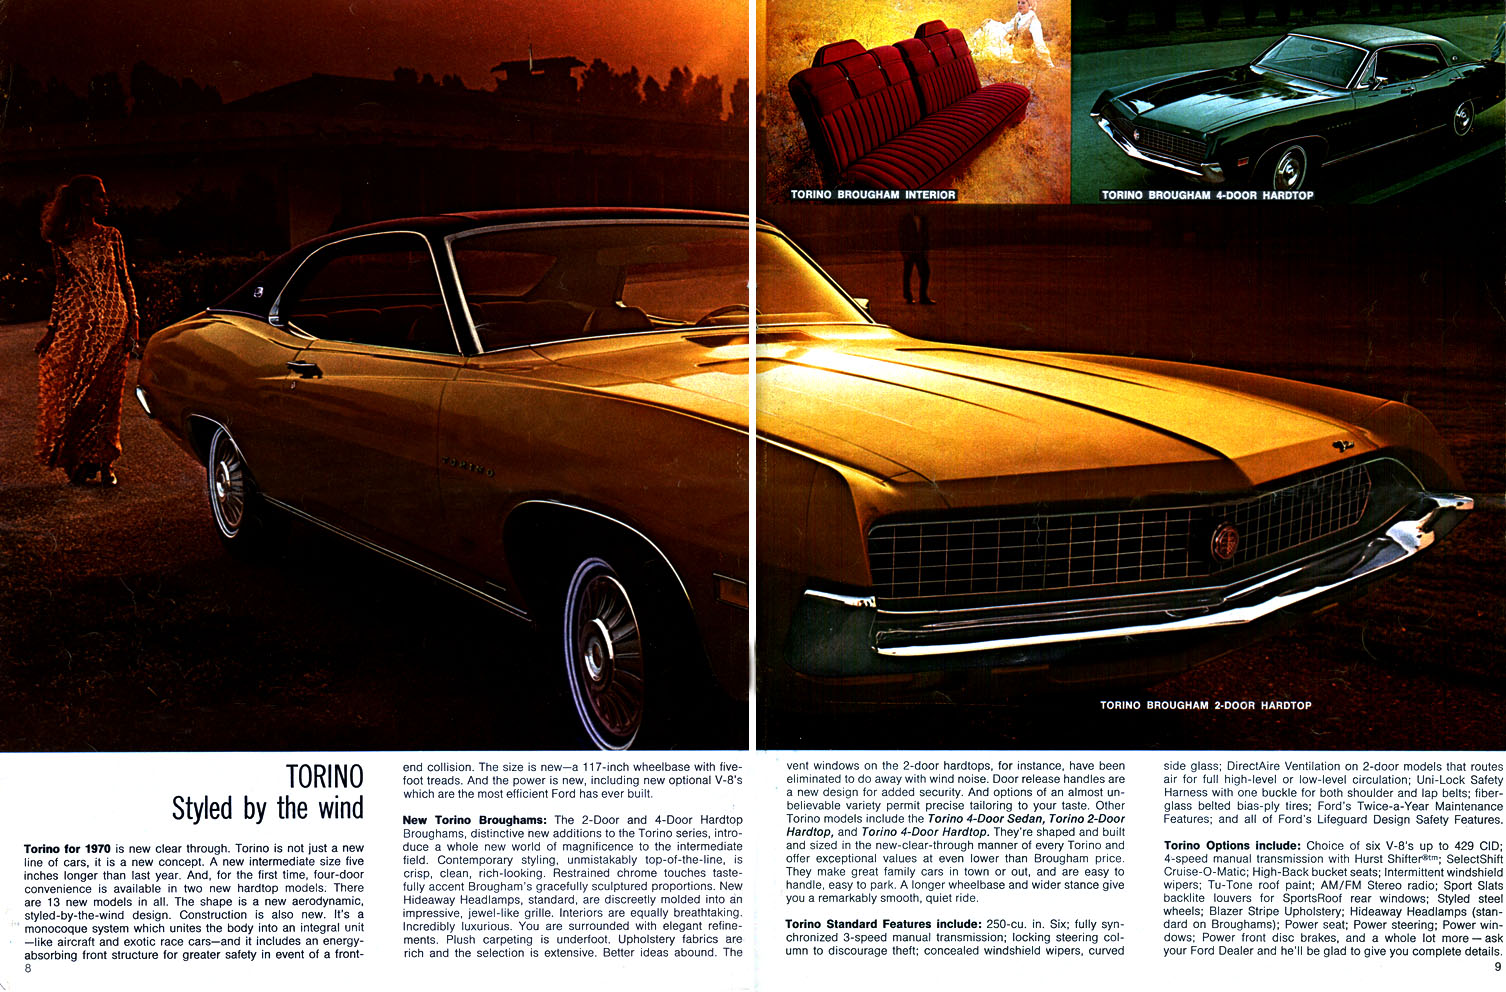 1970_Ford_Buyers_Digest-08-09